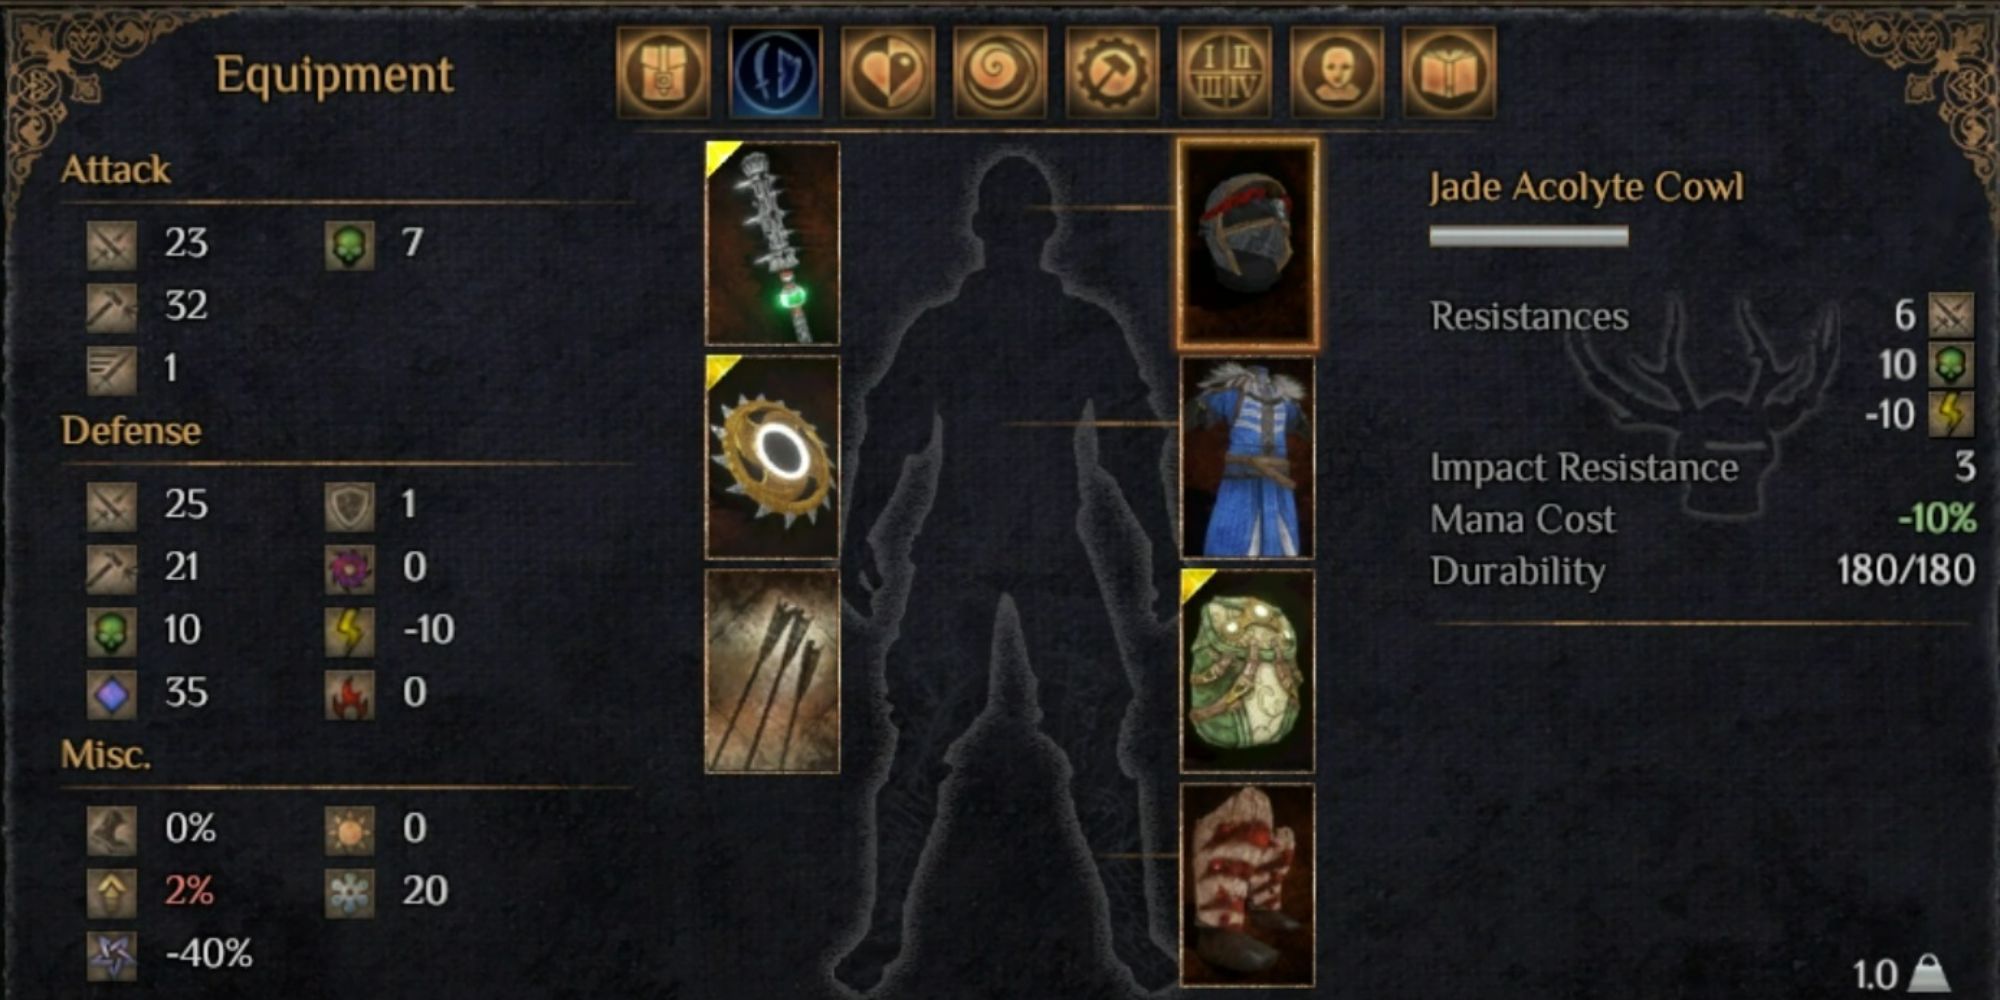 The character's inventory in Outward